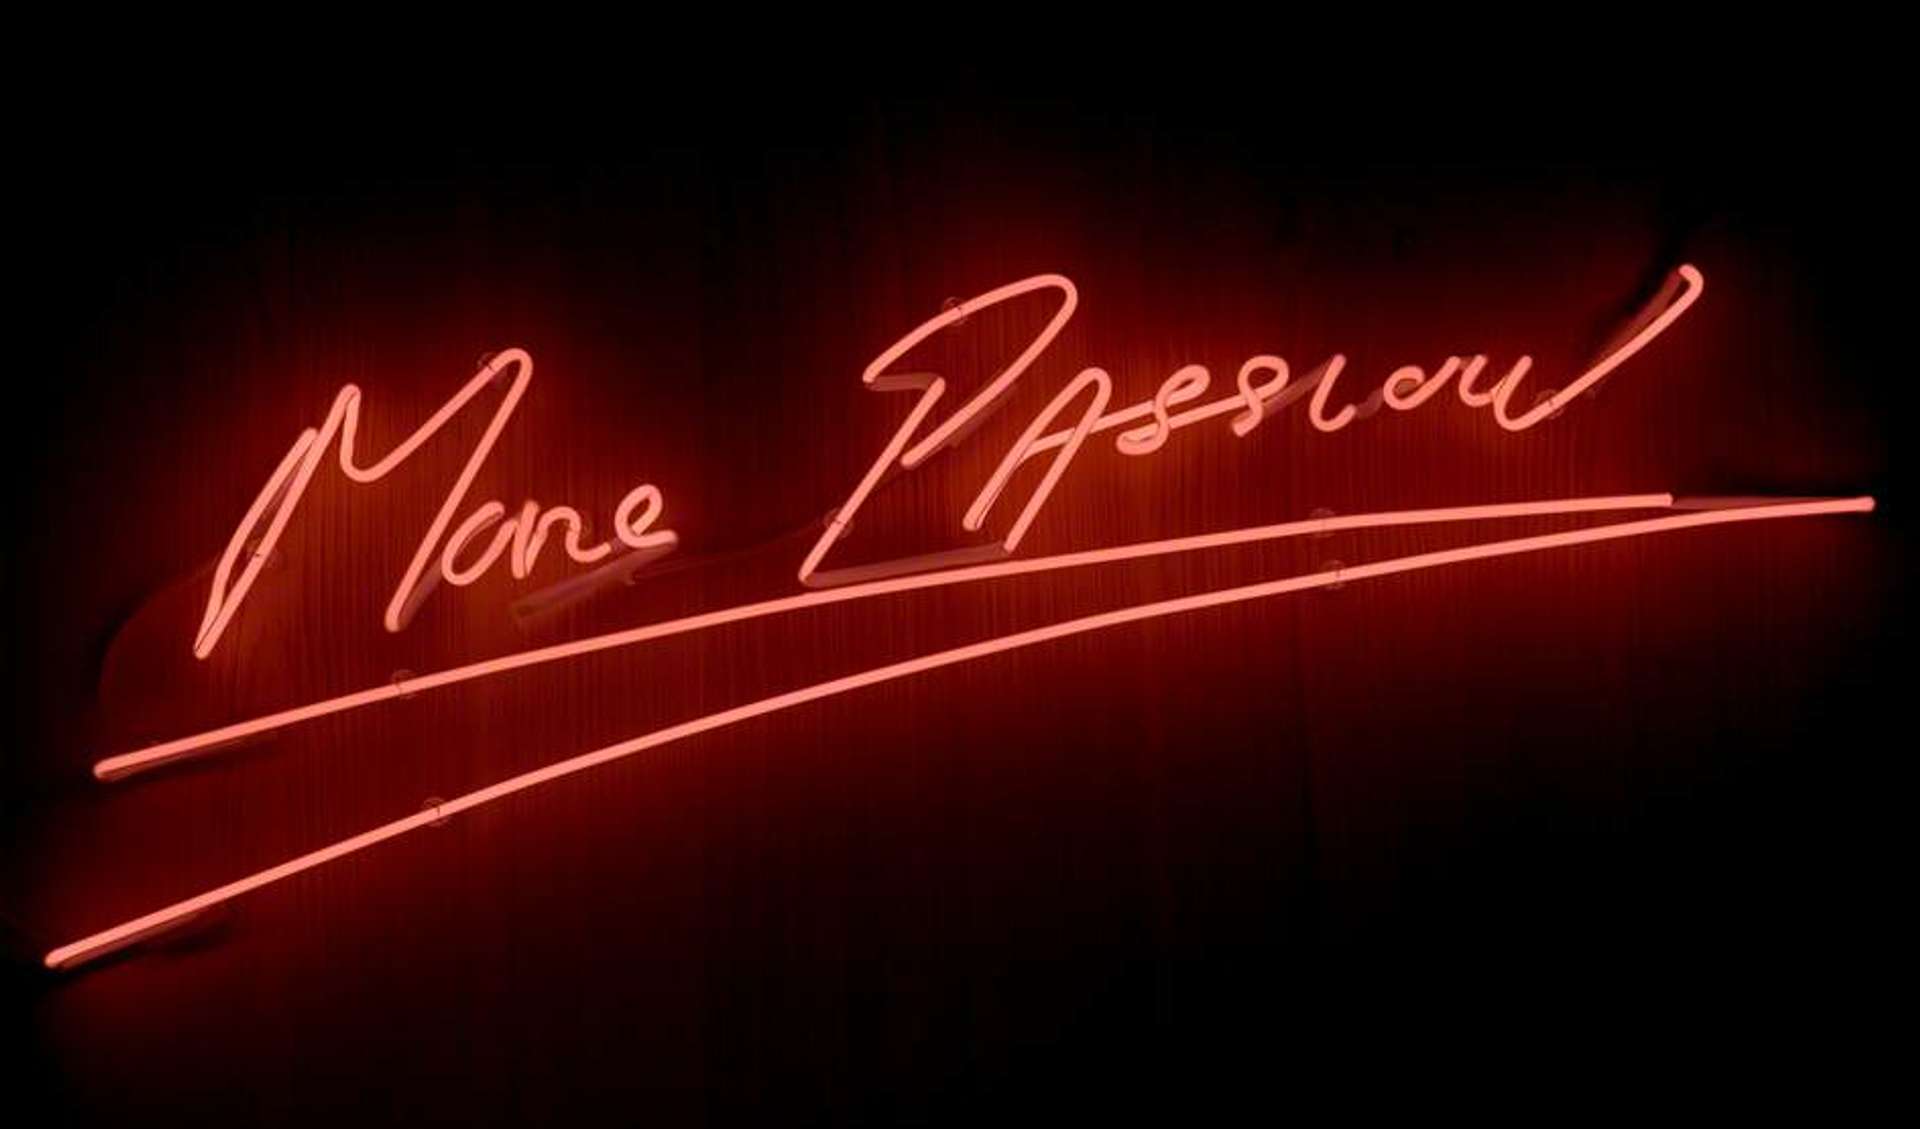 Tracey Emin's More Passion. A neon work with text that reads "More Passion" in red